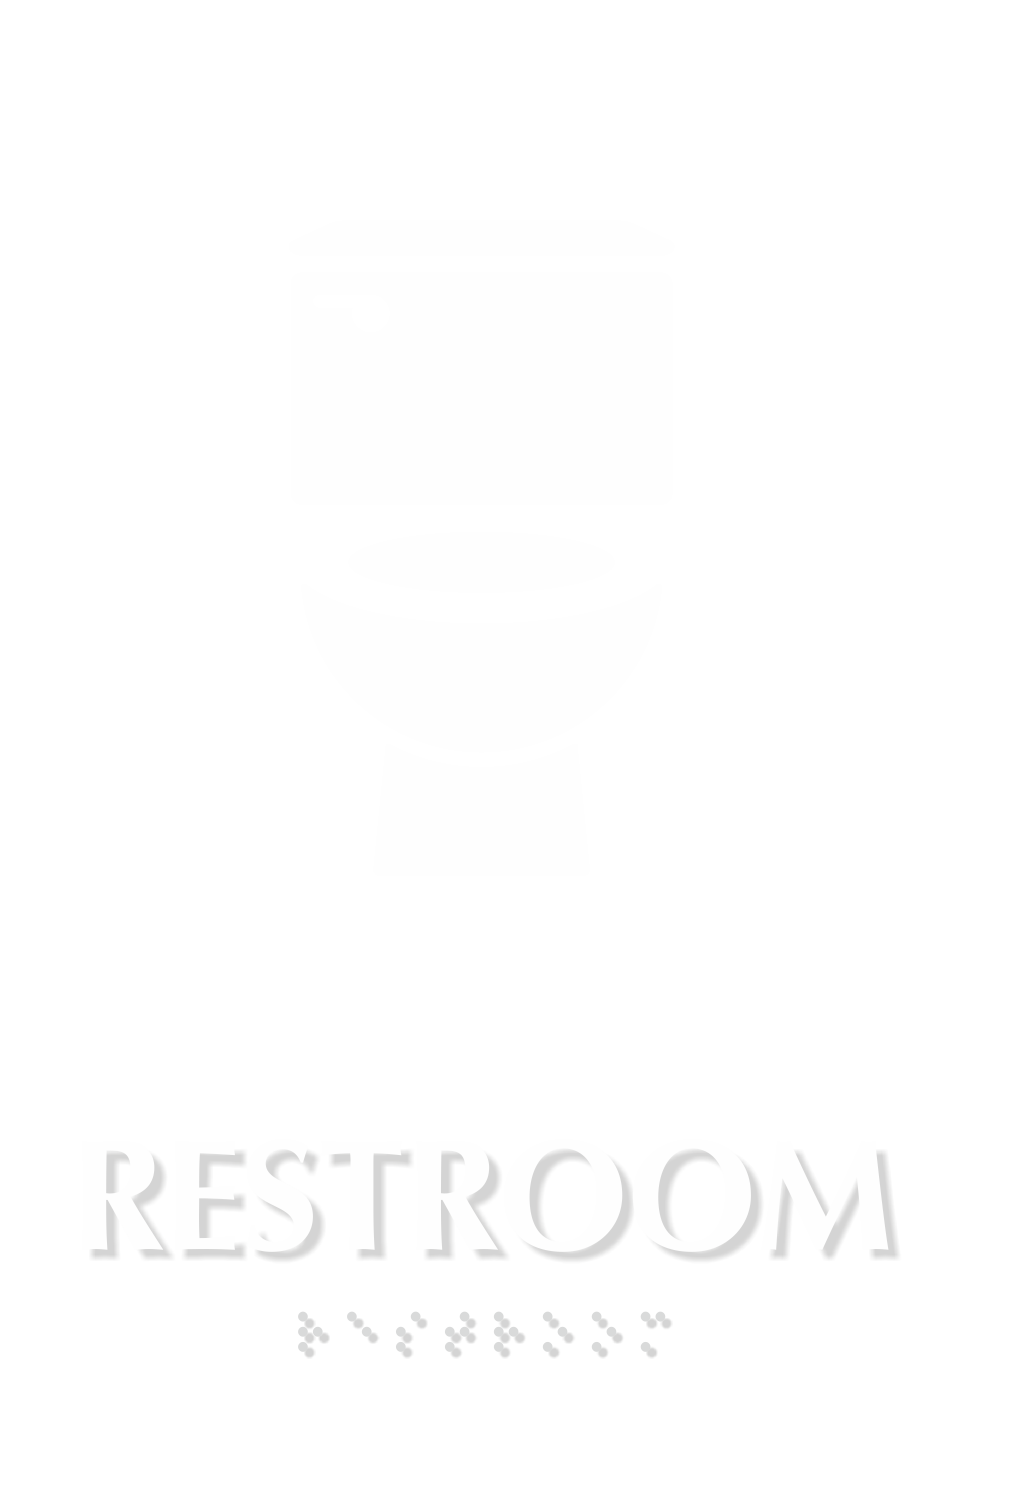 Restroom TactileTouch Braille Sign